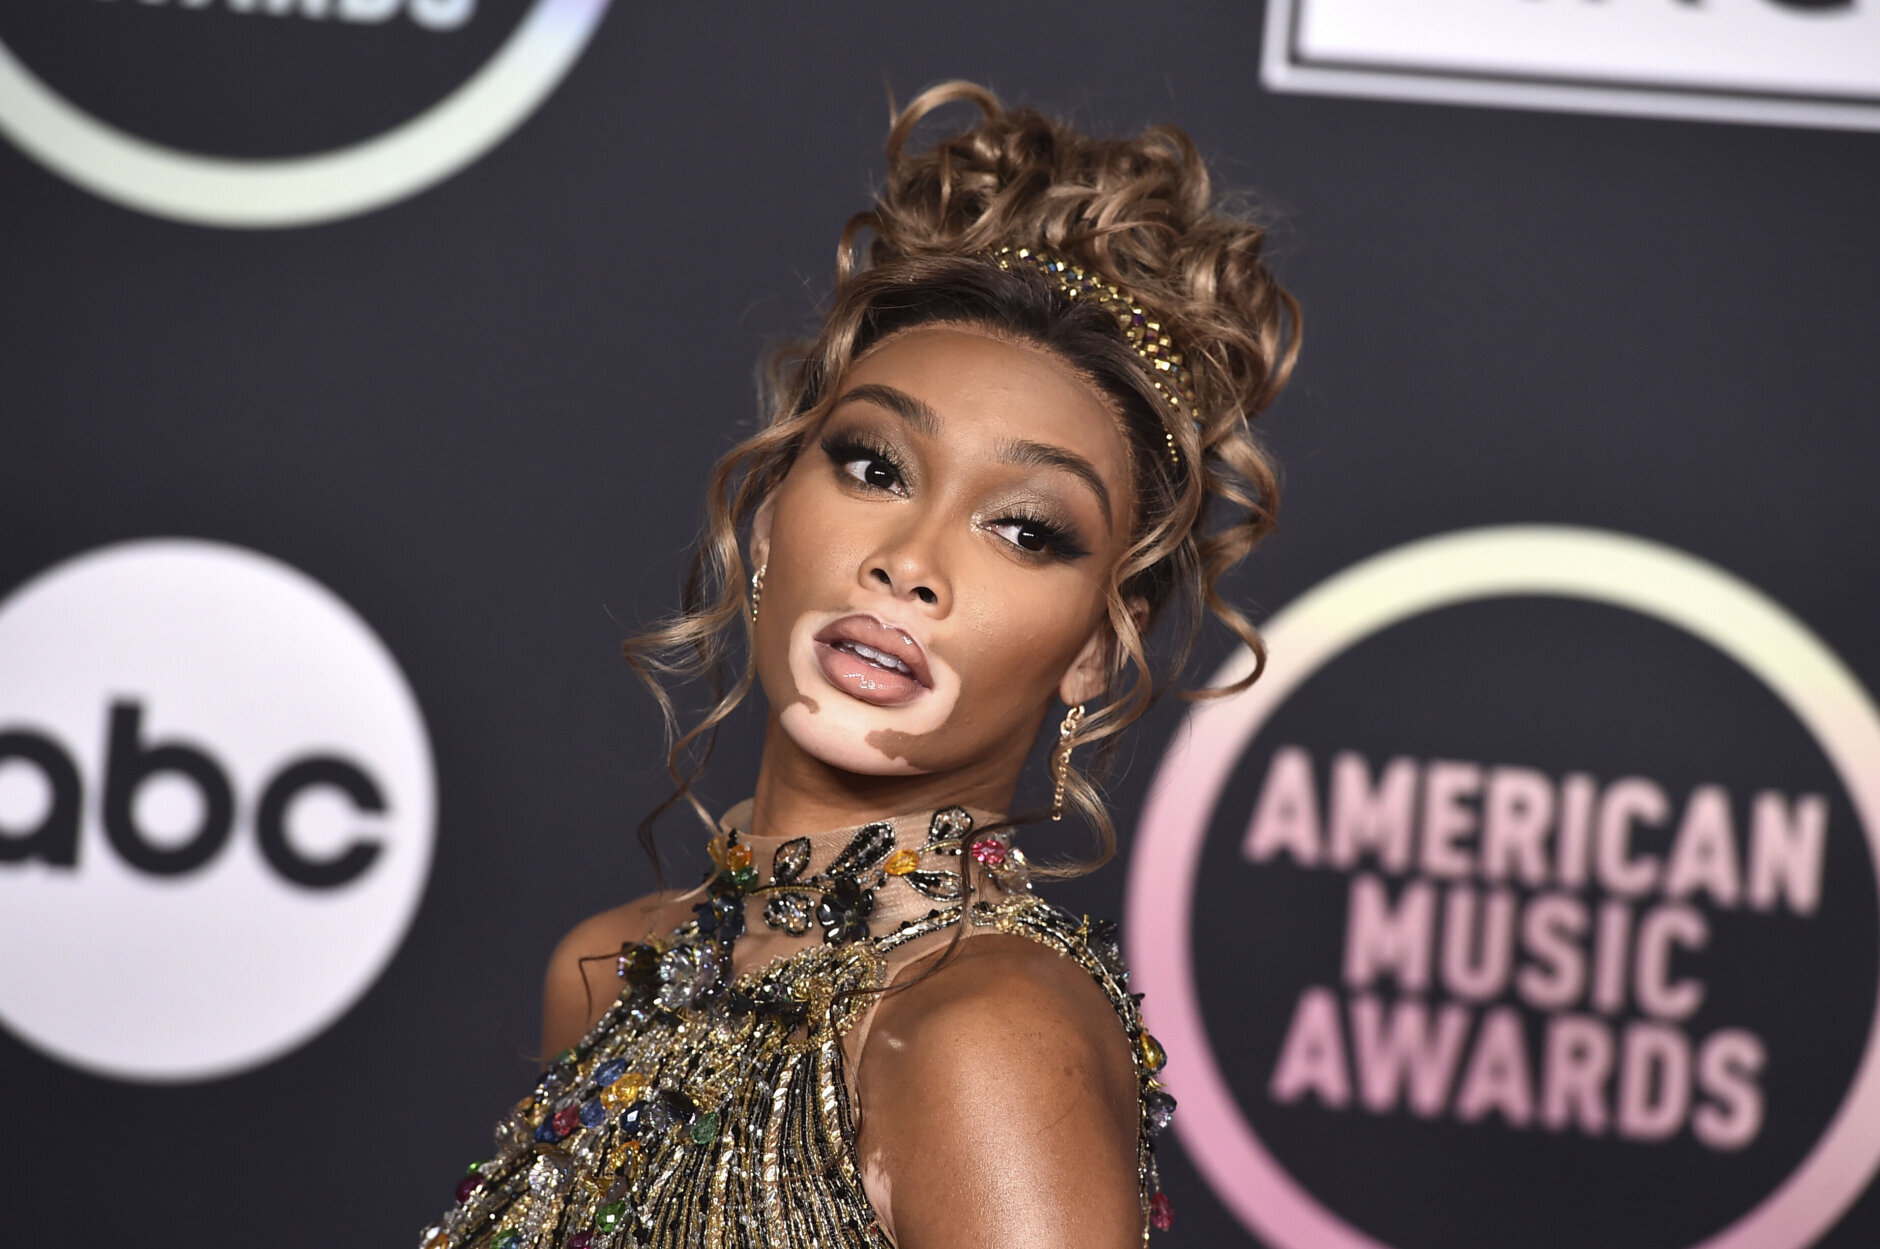 Winnie Harlow arrives at the American Music Awards on Sunday, Nov. 21, 2021, at Microsoft Theater in Los Angeles. (Photo by Jordan Strauss/Invision/AP)